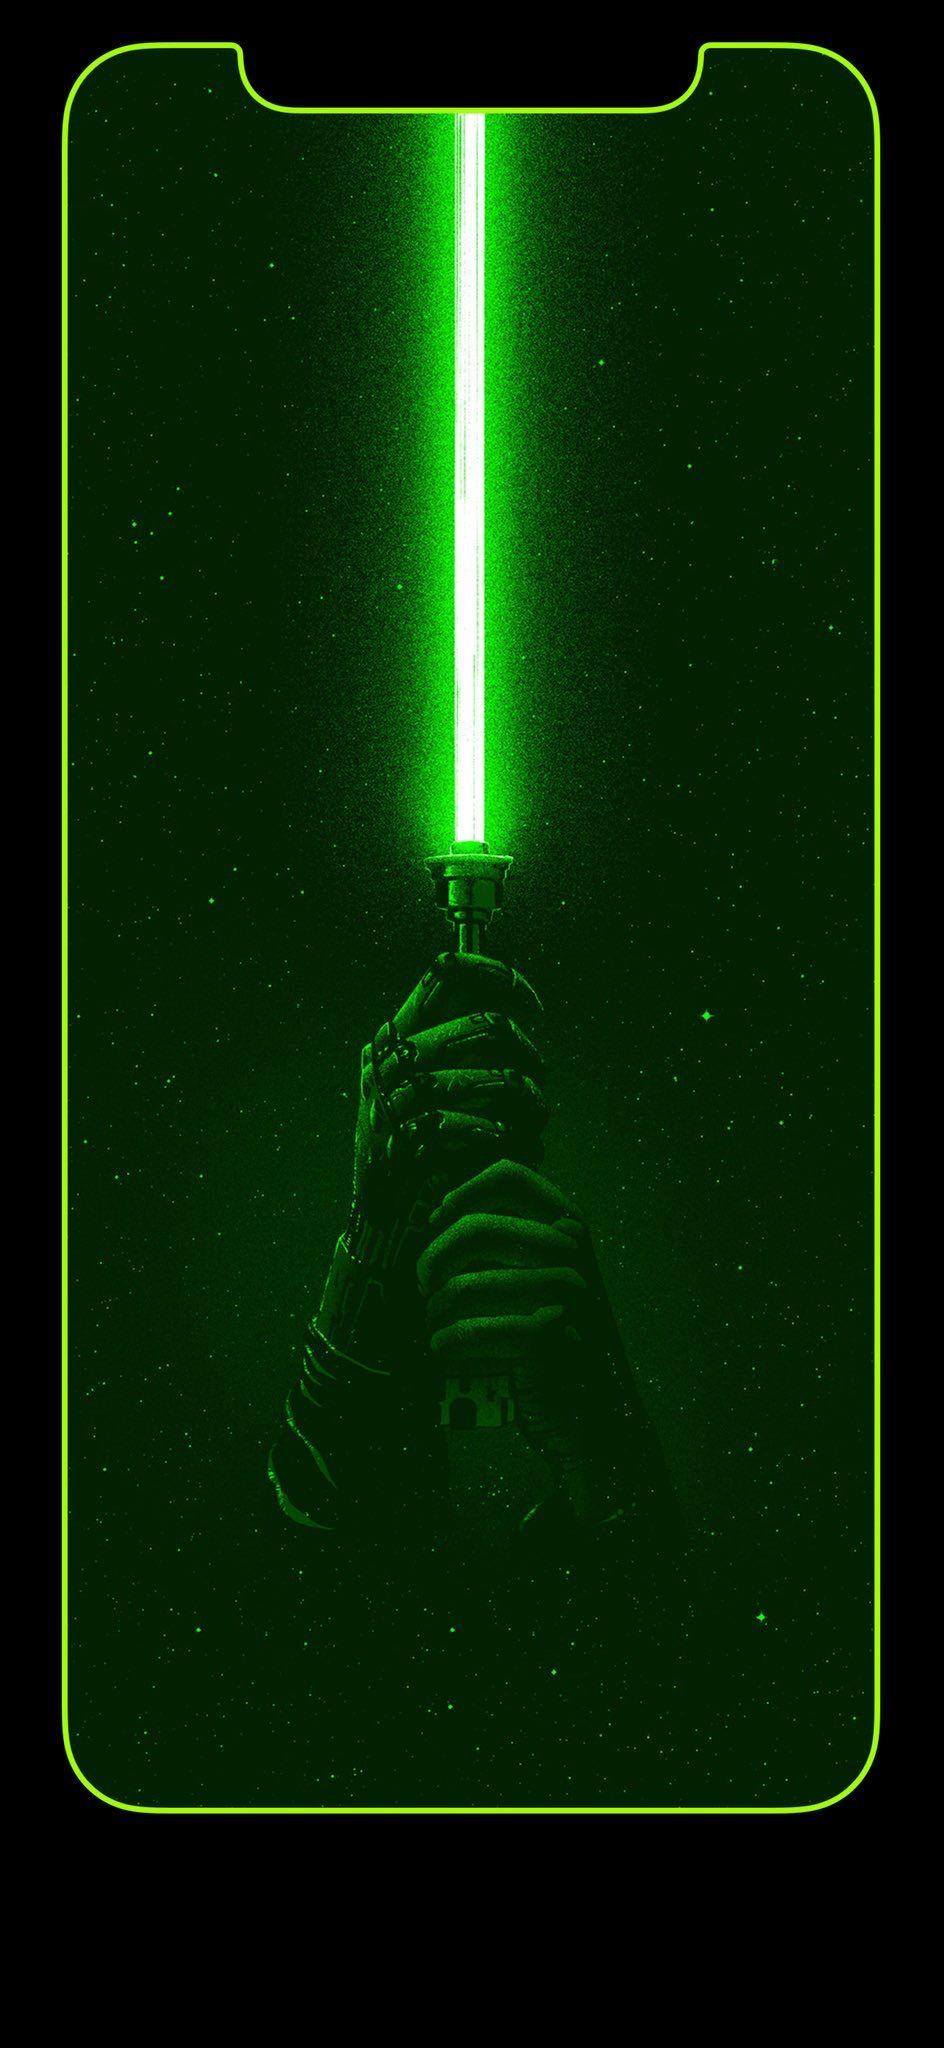 I cannot remember where I found it so unfortunately I don't know who to give credit to. I love how it lights up like a true lightsaber + edges when waking lock